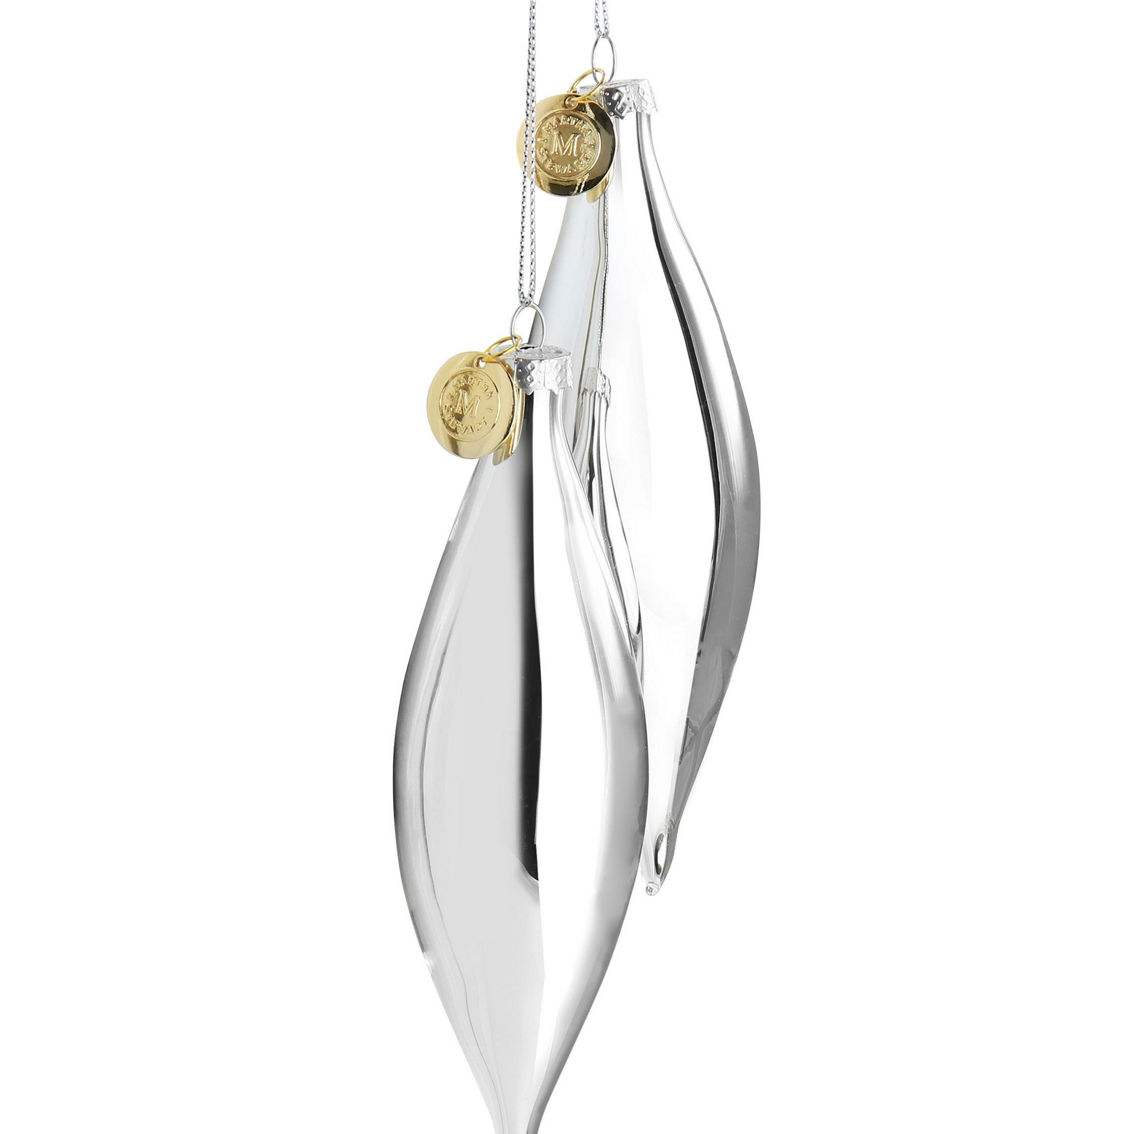 Martha Stewart Holiday Double Pointed 3 Piece Ornament Set in Silver - Image 2 of 4